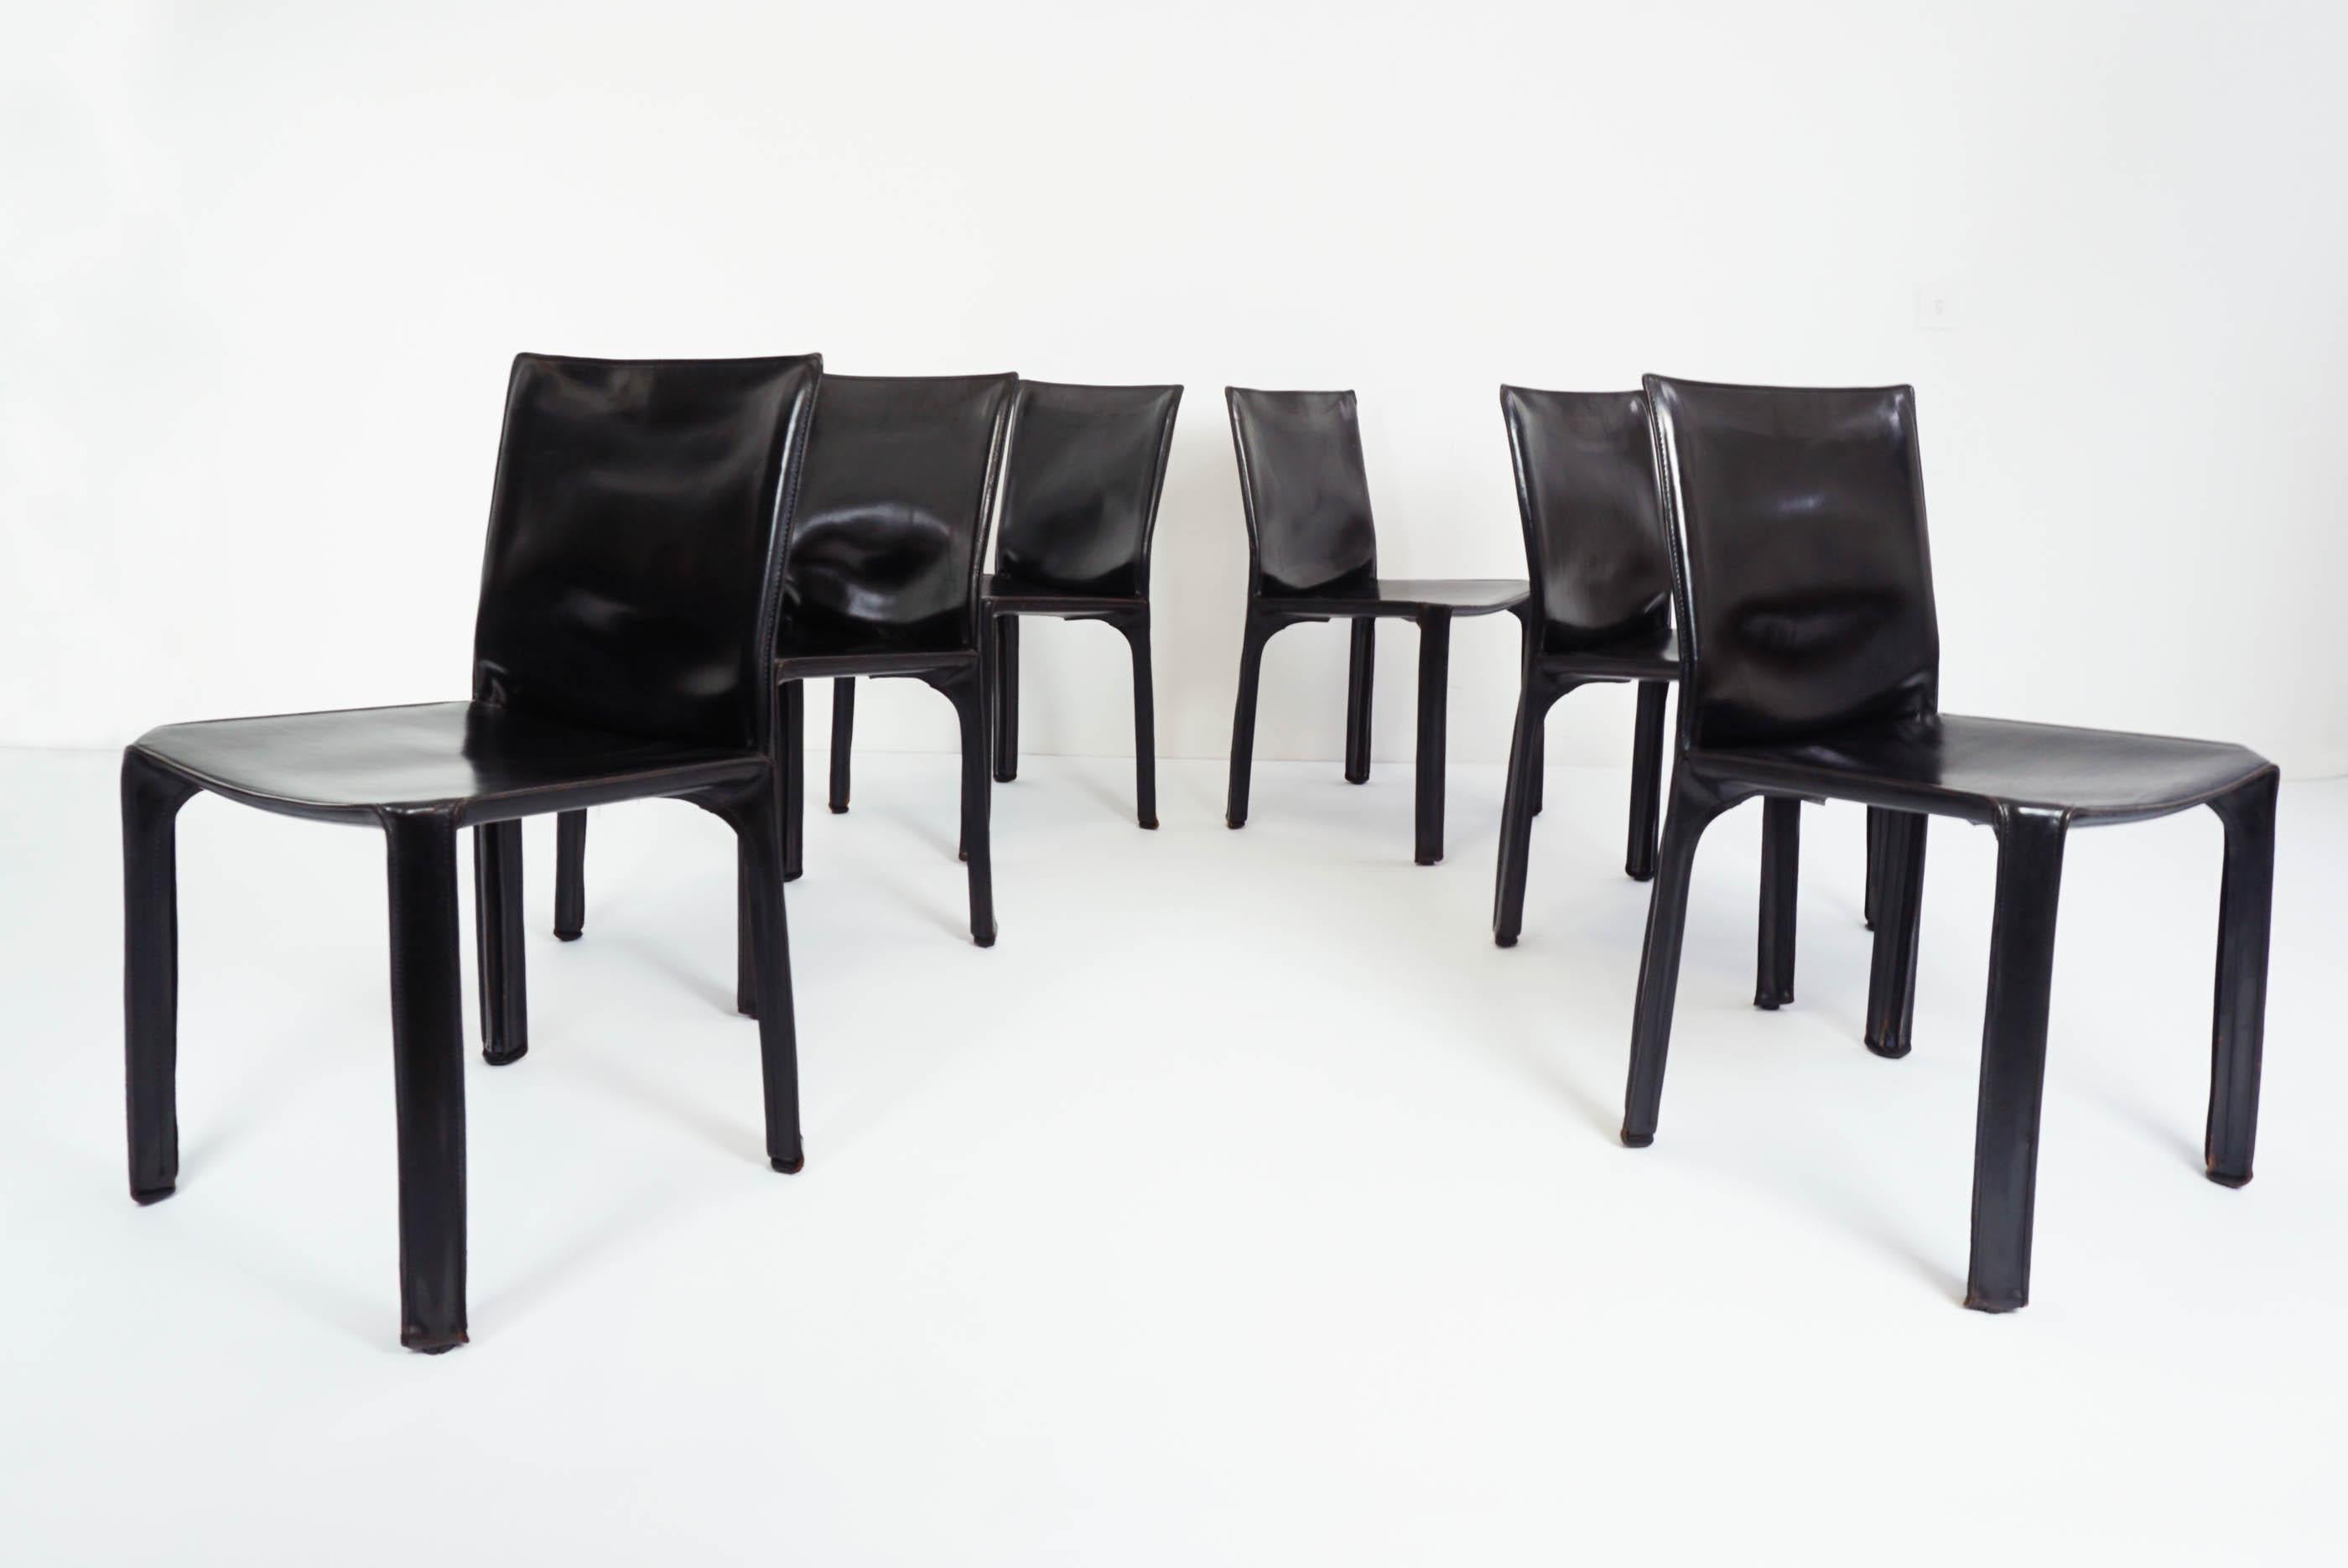 Beautiful set of 6 black patina leather chairs,
Italy, 1977.